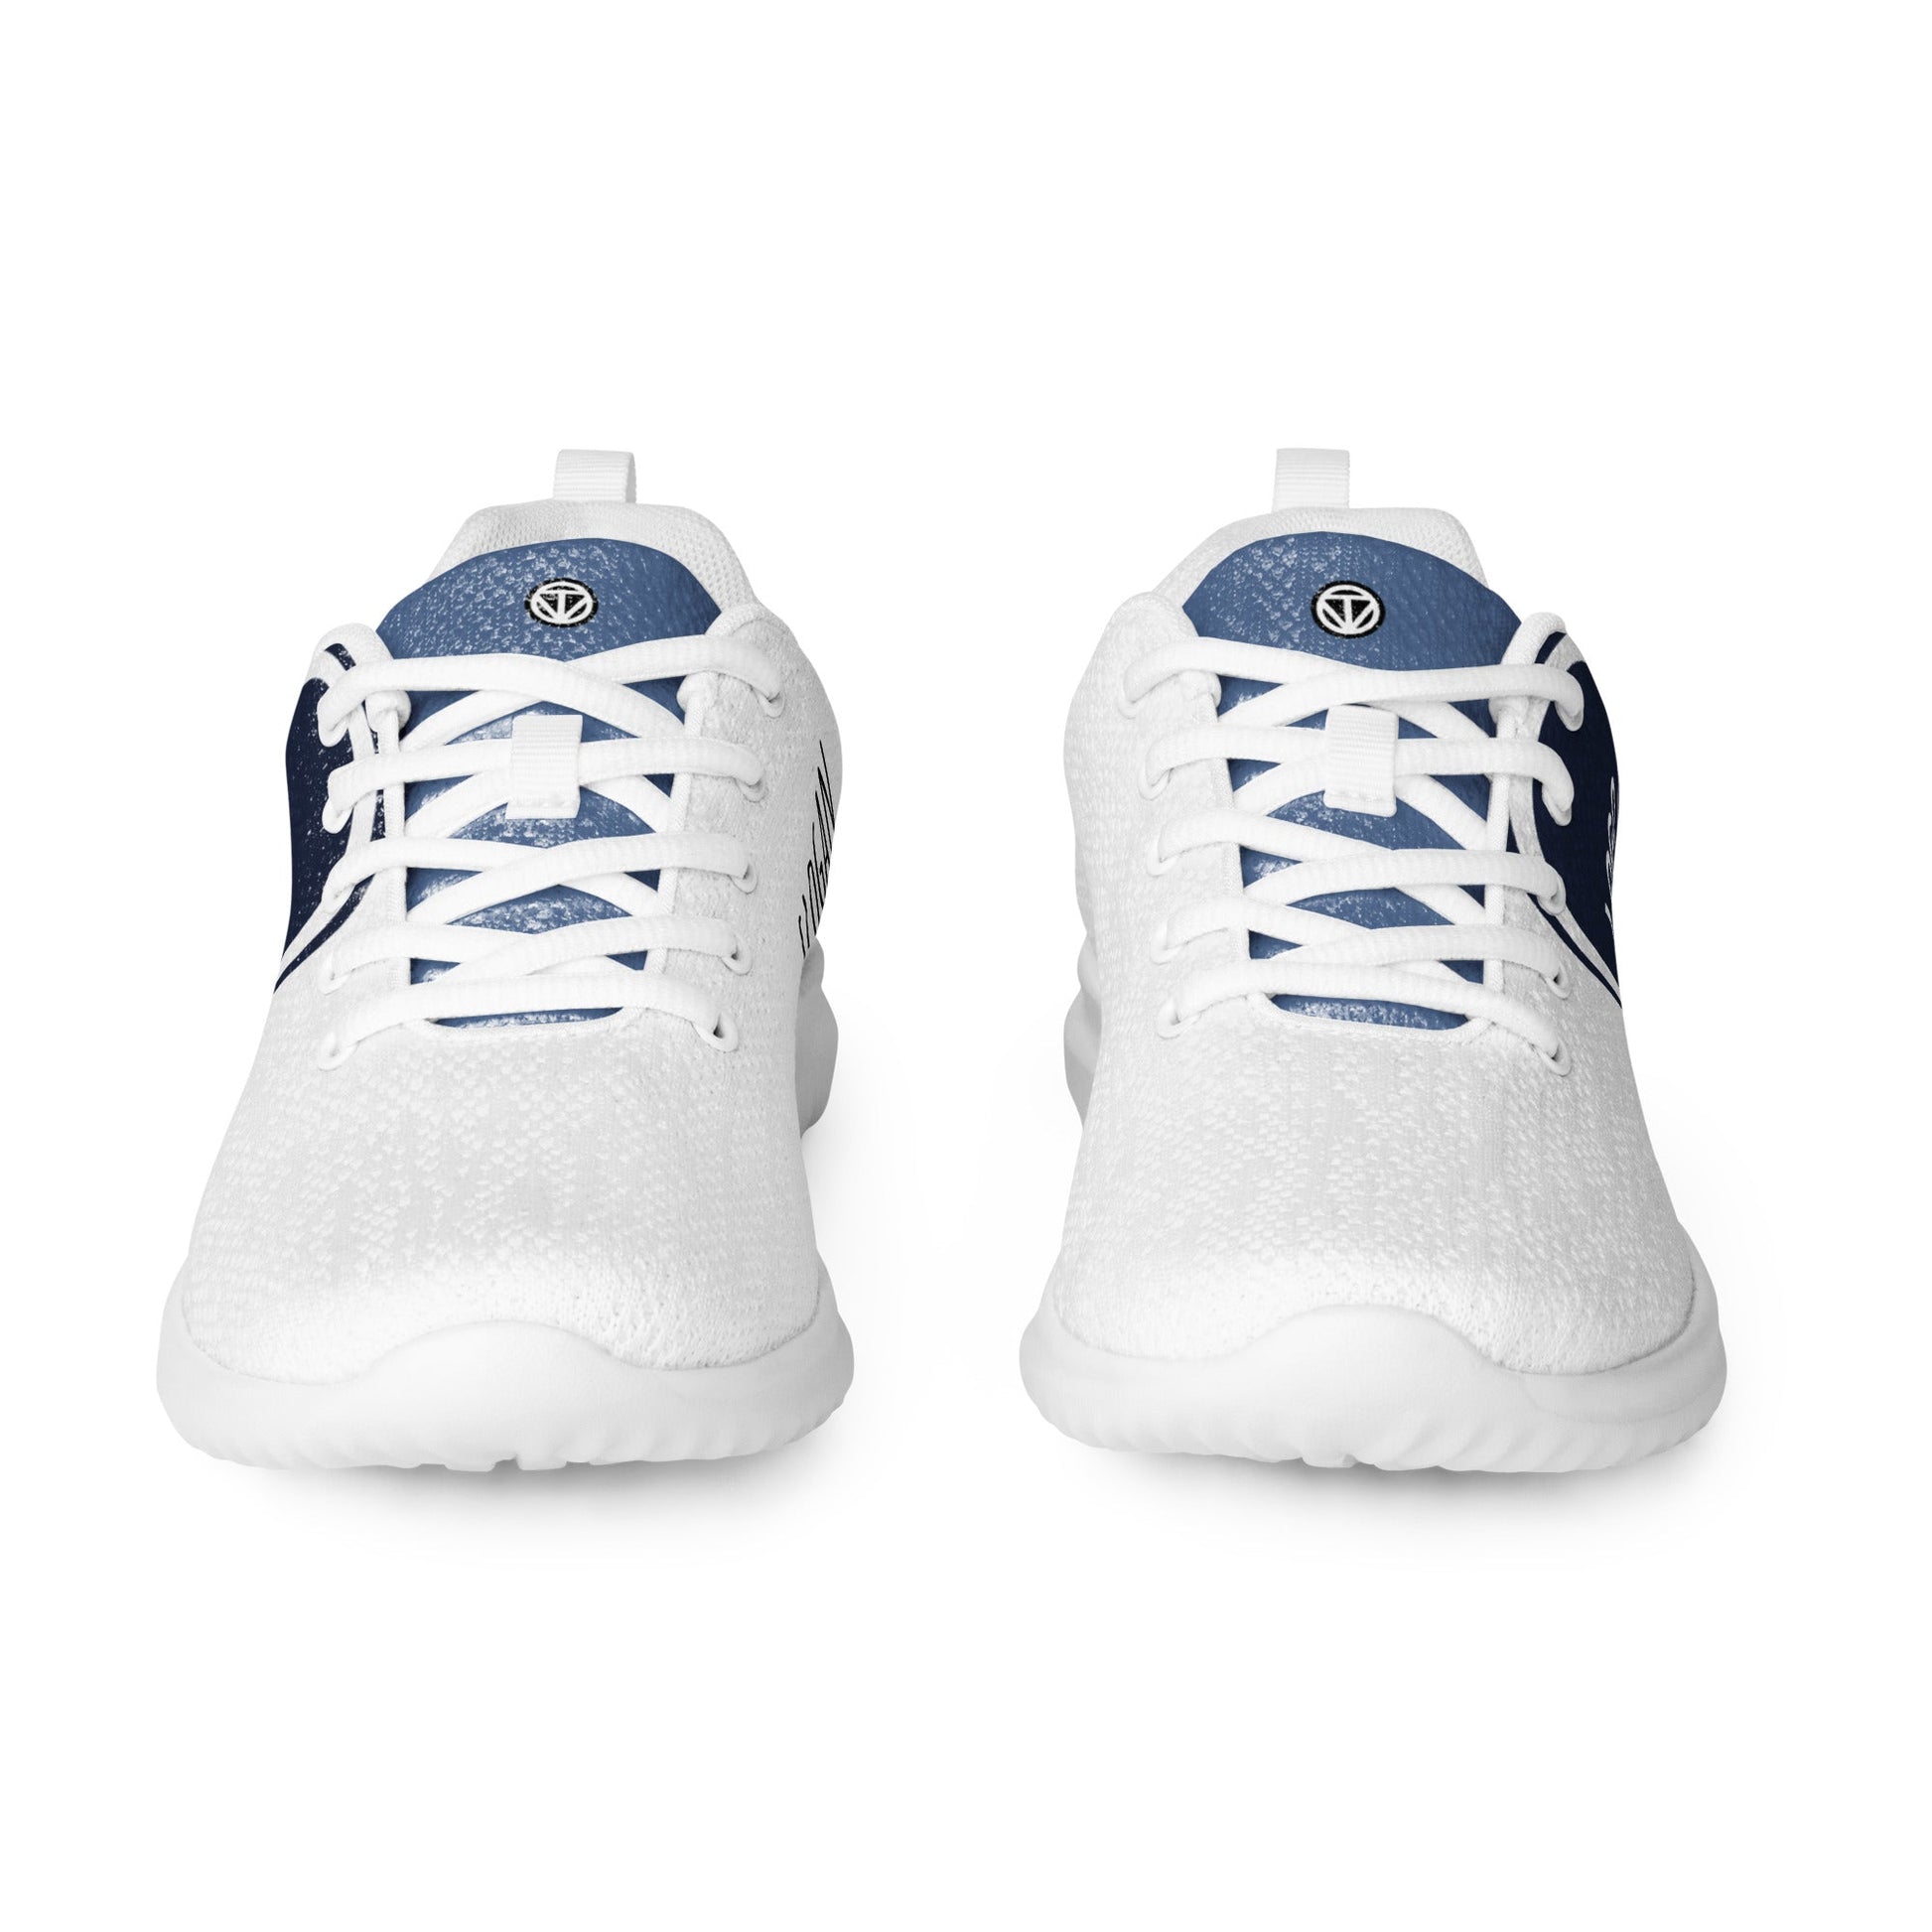 TIME OF VIBES - Men’s athletic shoes Demo CORPORATE - €89.00